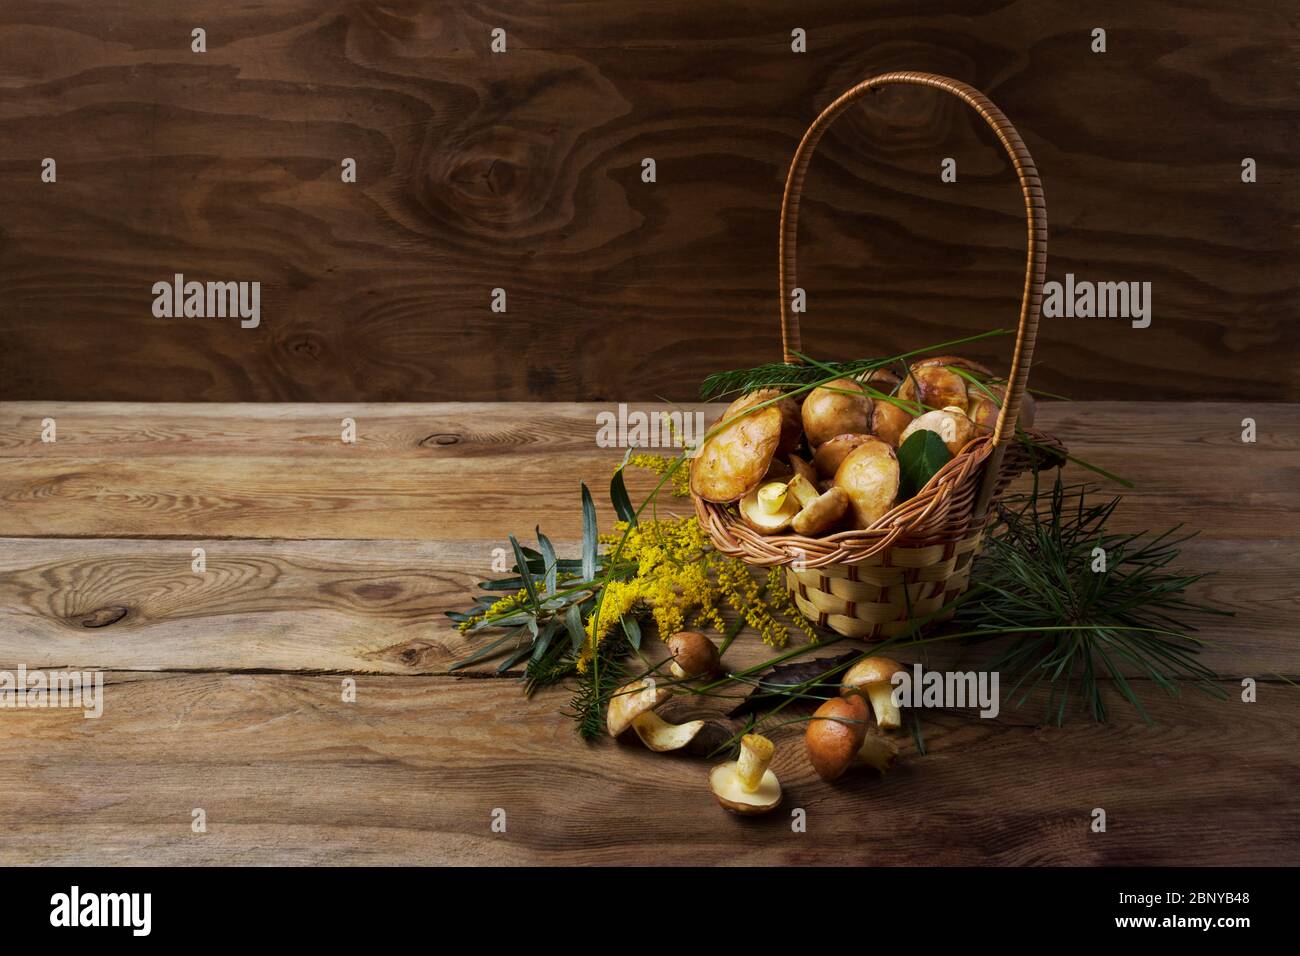 Wicker basket with wild forest picking slippery Jack mushrooms and green grass on the rustic wooden background. Vegetarian healthy food concept Stock Photo